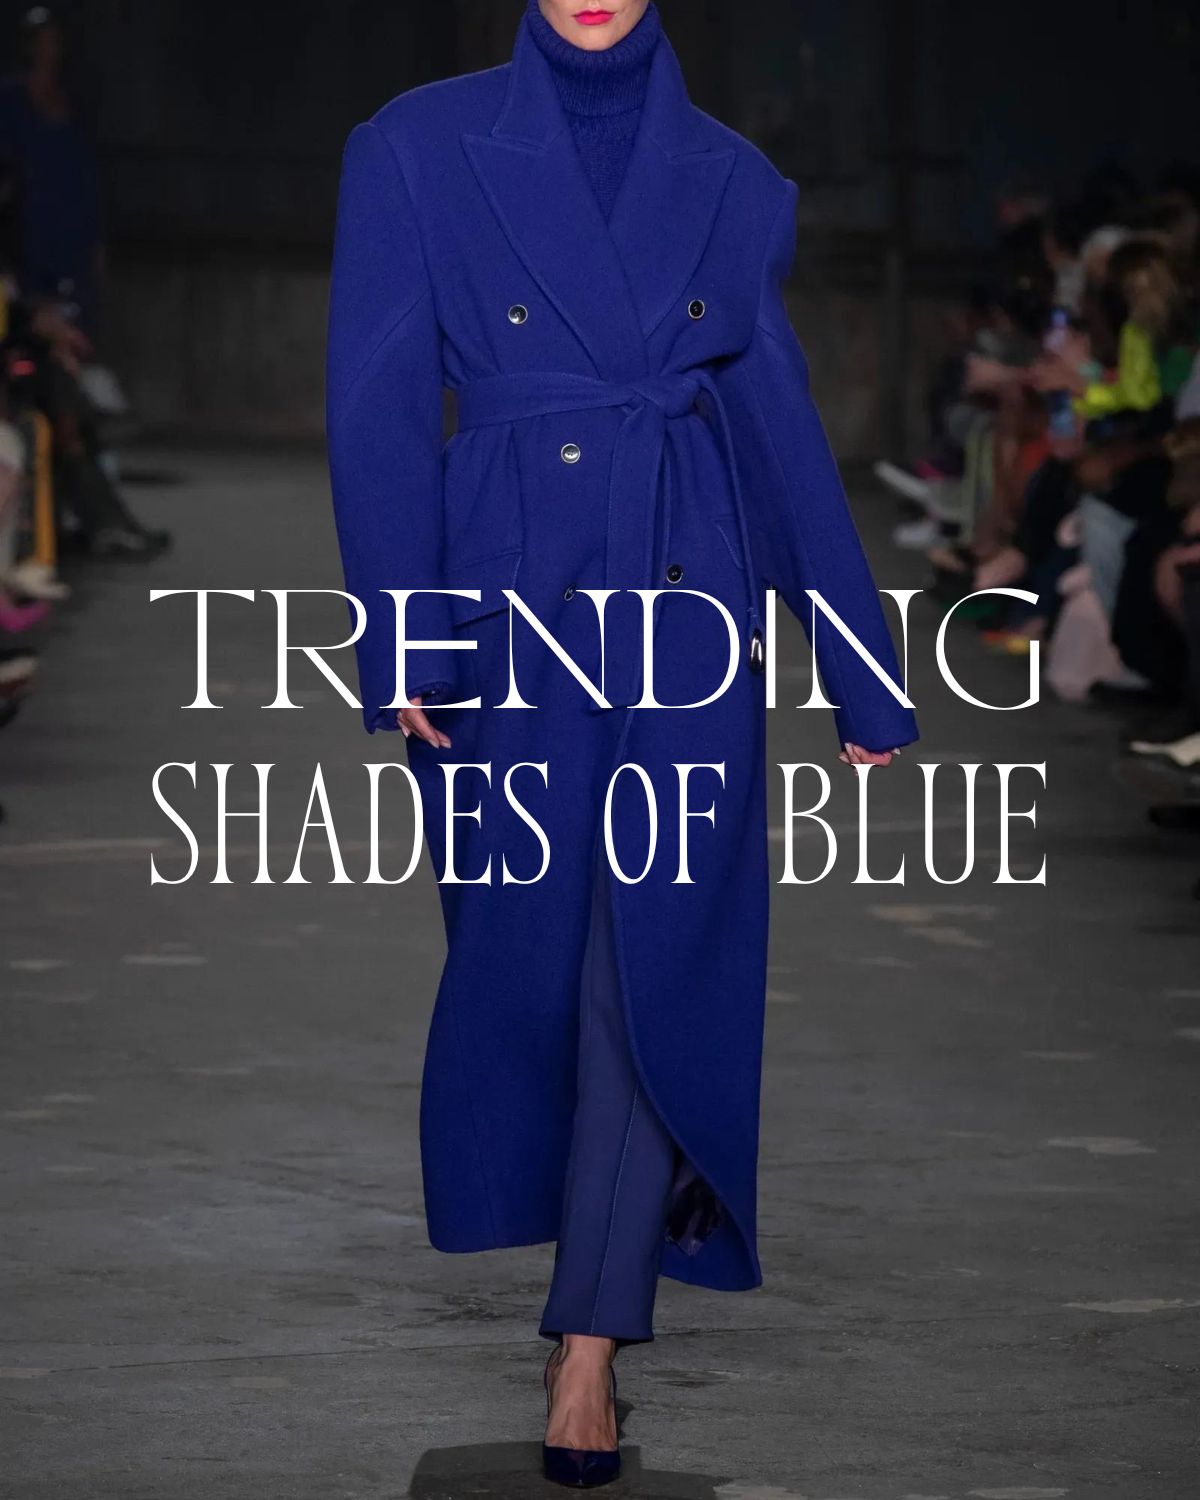  A super model walking down the runway in a blue coat and trousers